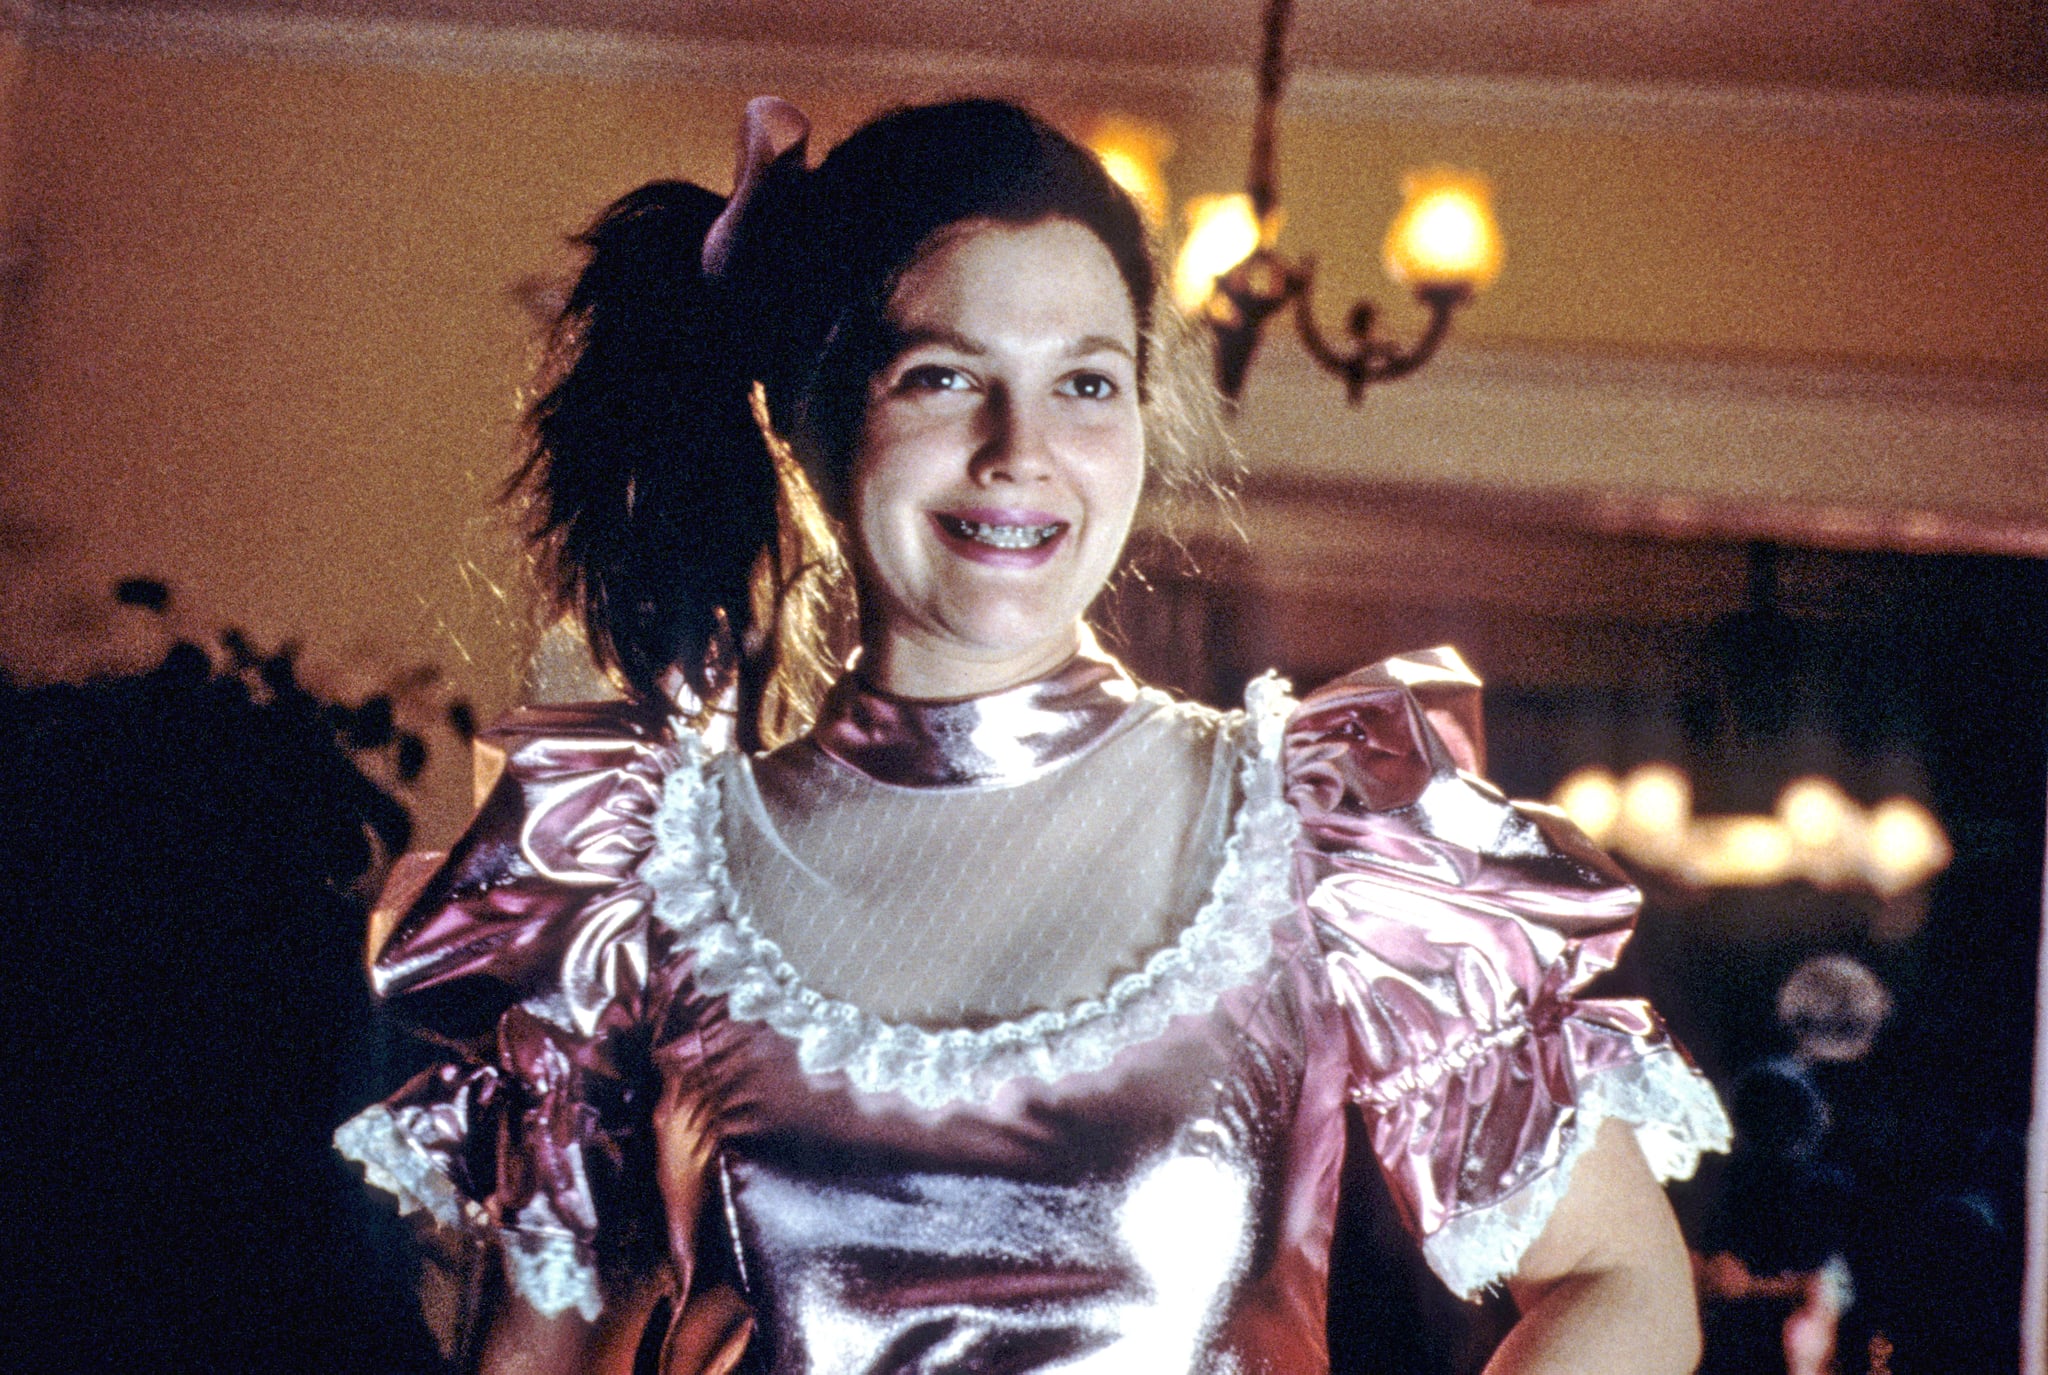 NEVER BEEN KISSED, Drew Barrymore, 1999. (image upgraded to 17 x 11.47 in)